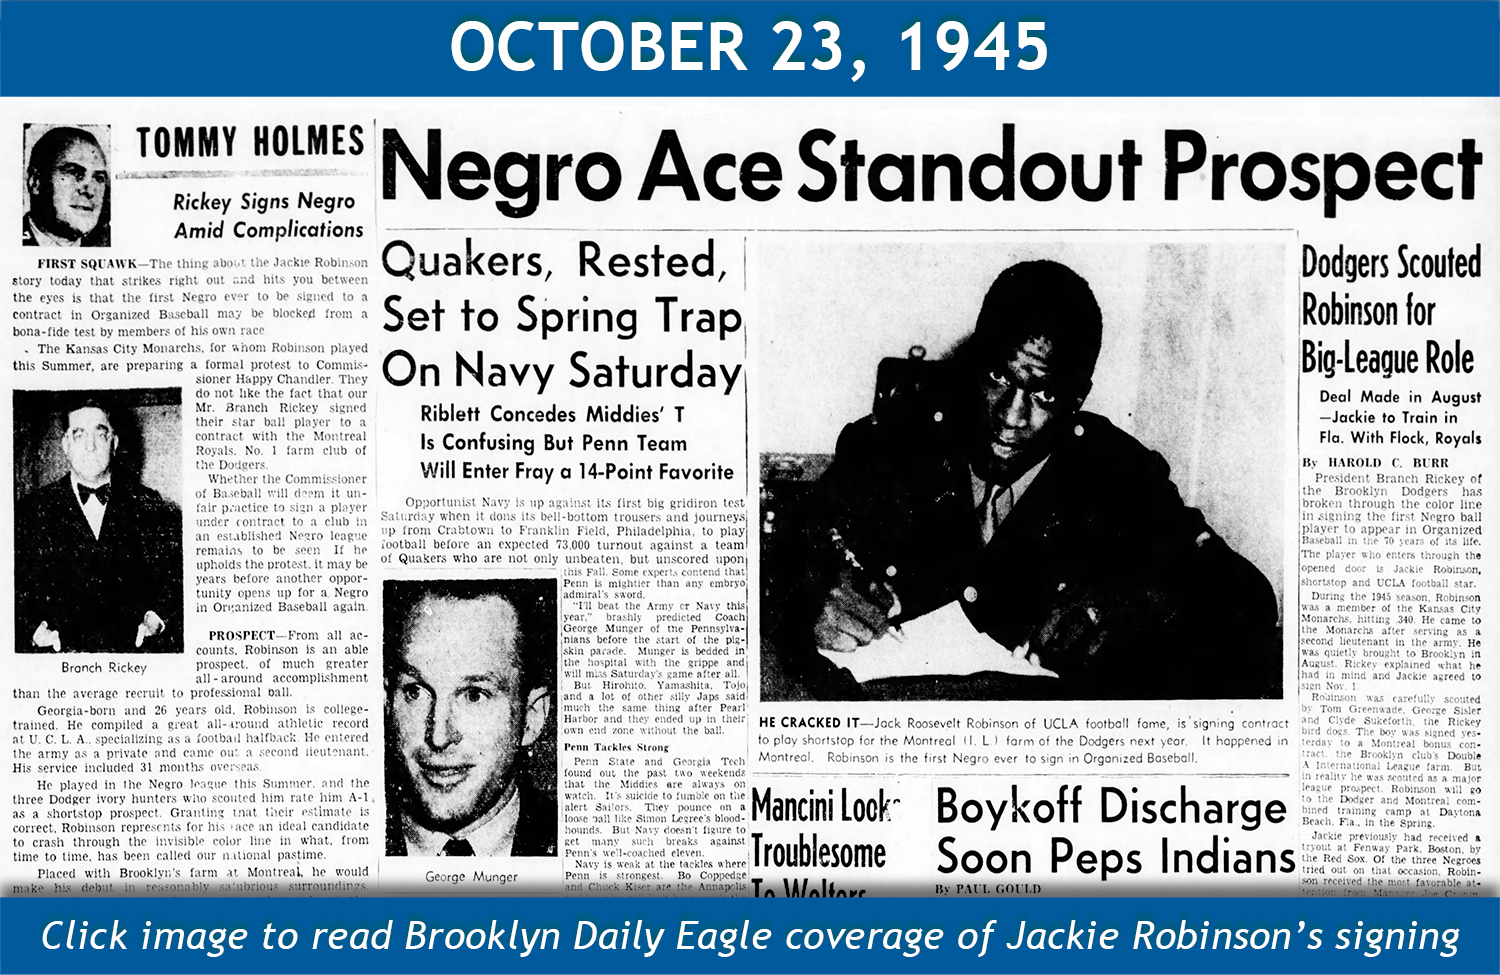 Brooklyn Daily Eagle coverage of Jackie Robinson's signing on October 23, 1945